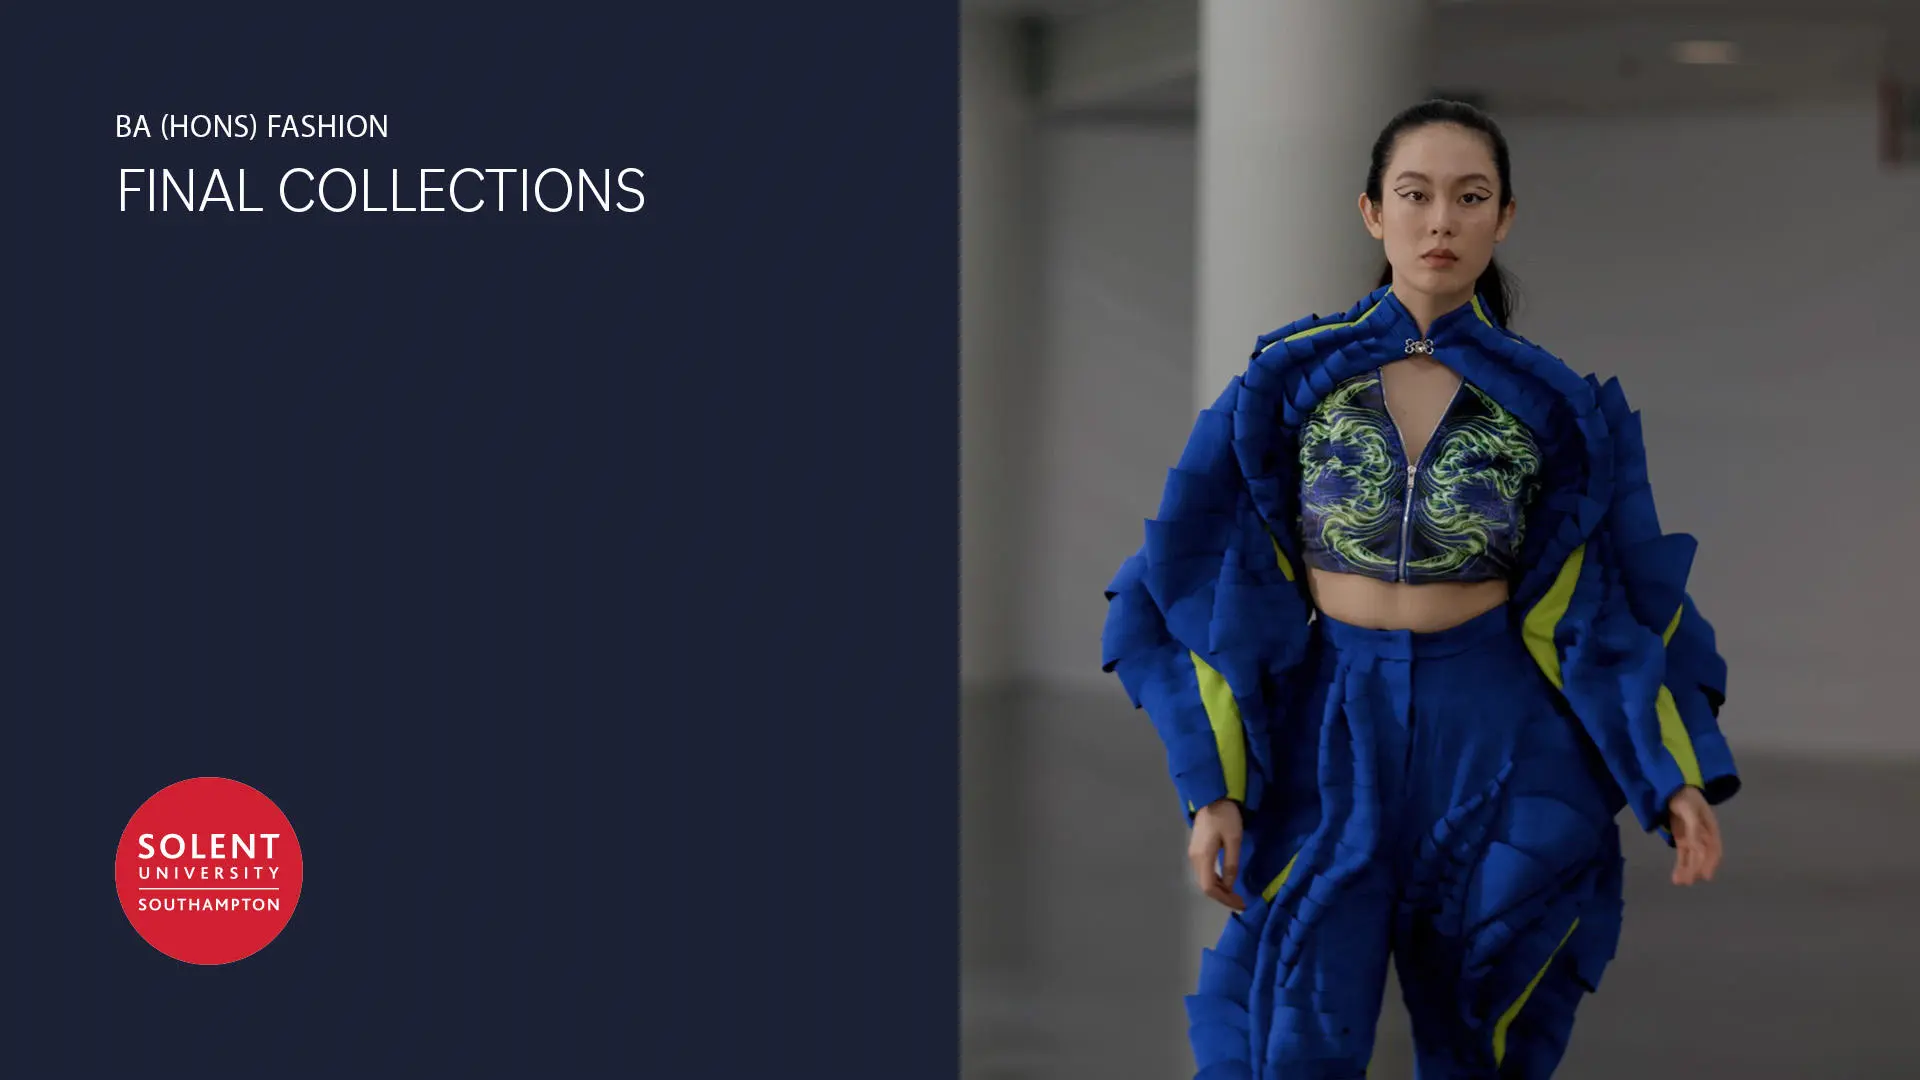 Image shows female model in blue garment, with text BA (Hons) Fashion - Final collections